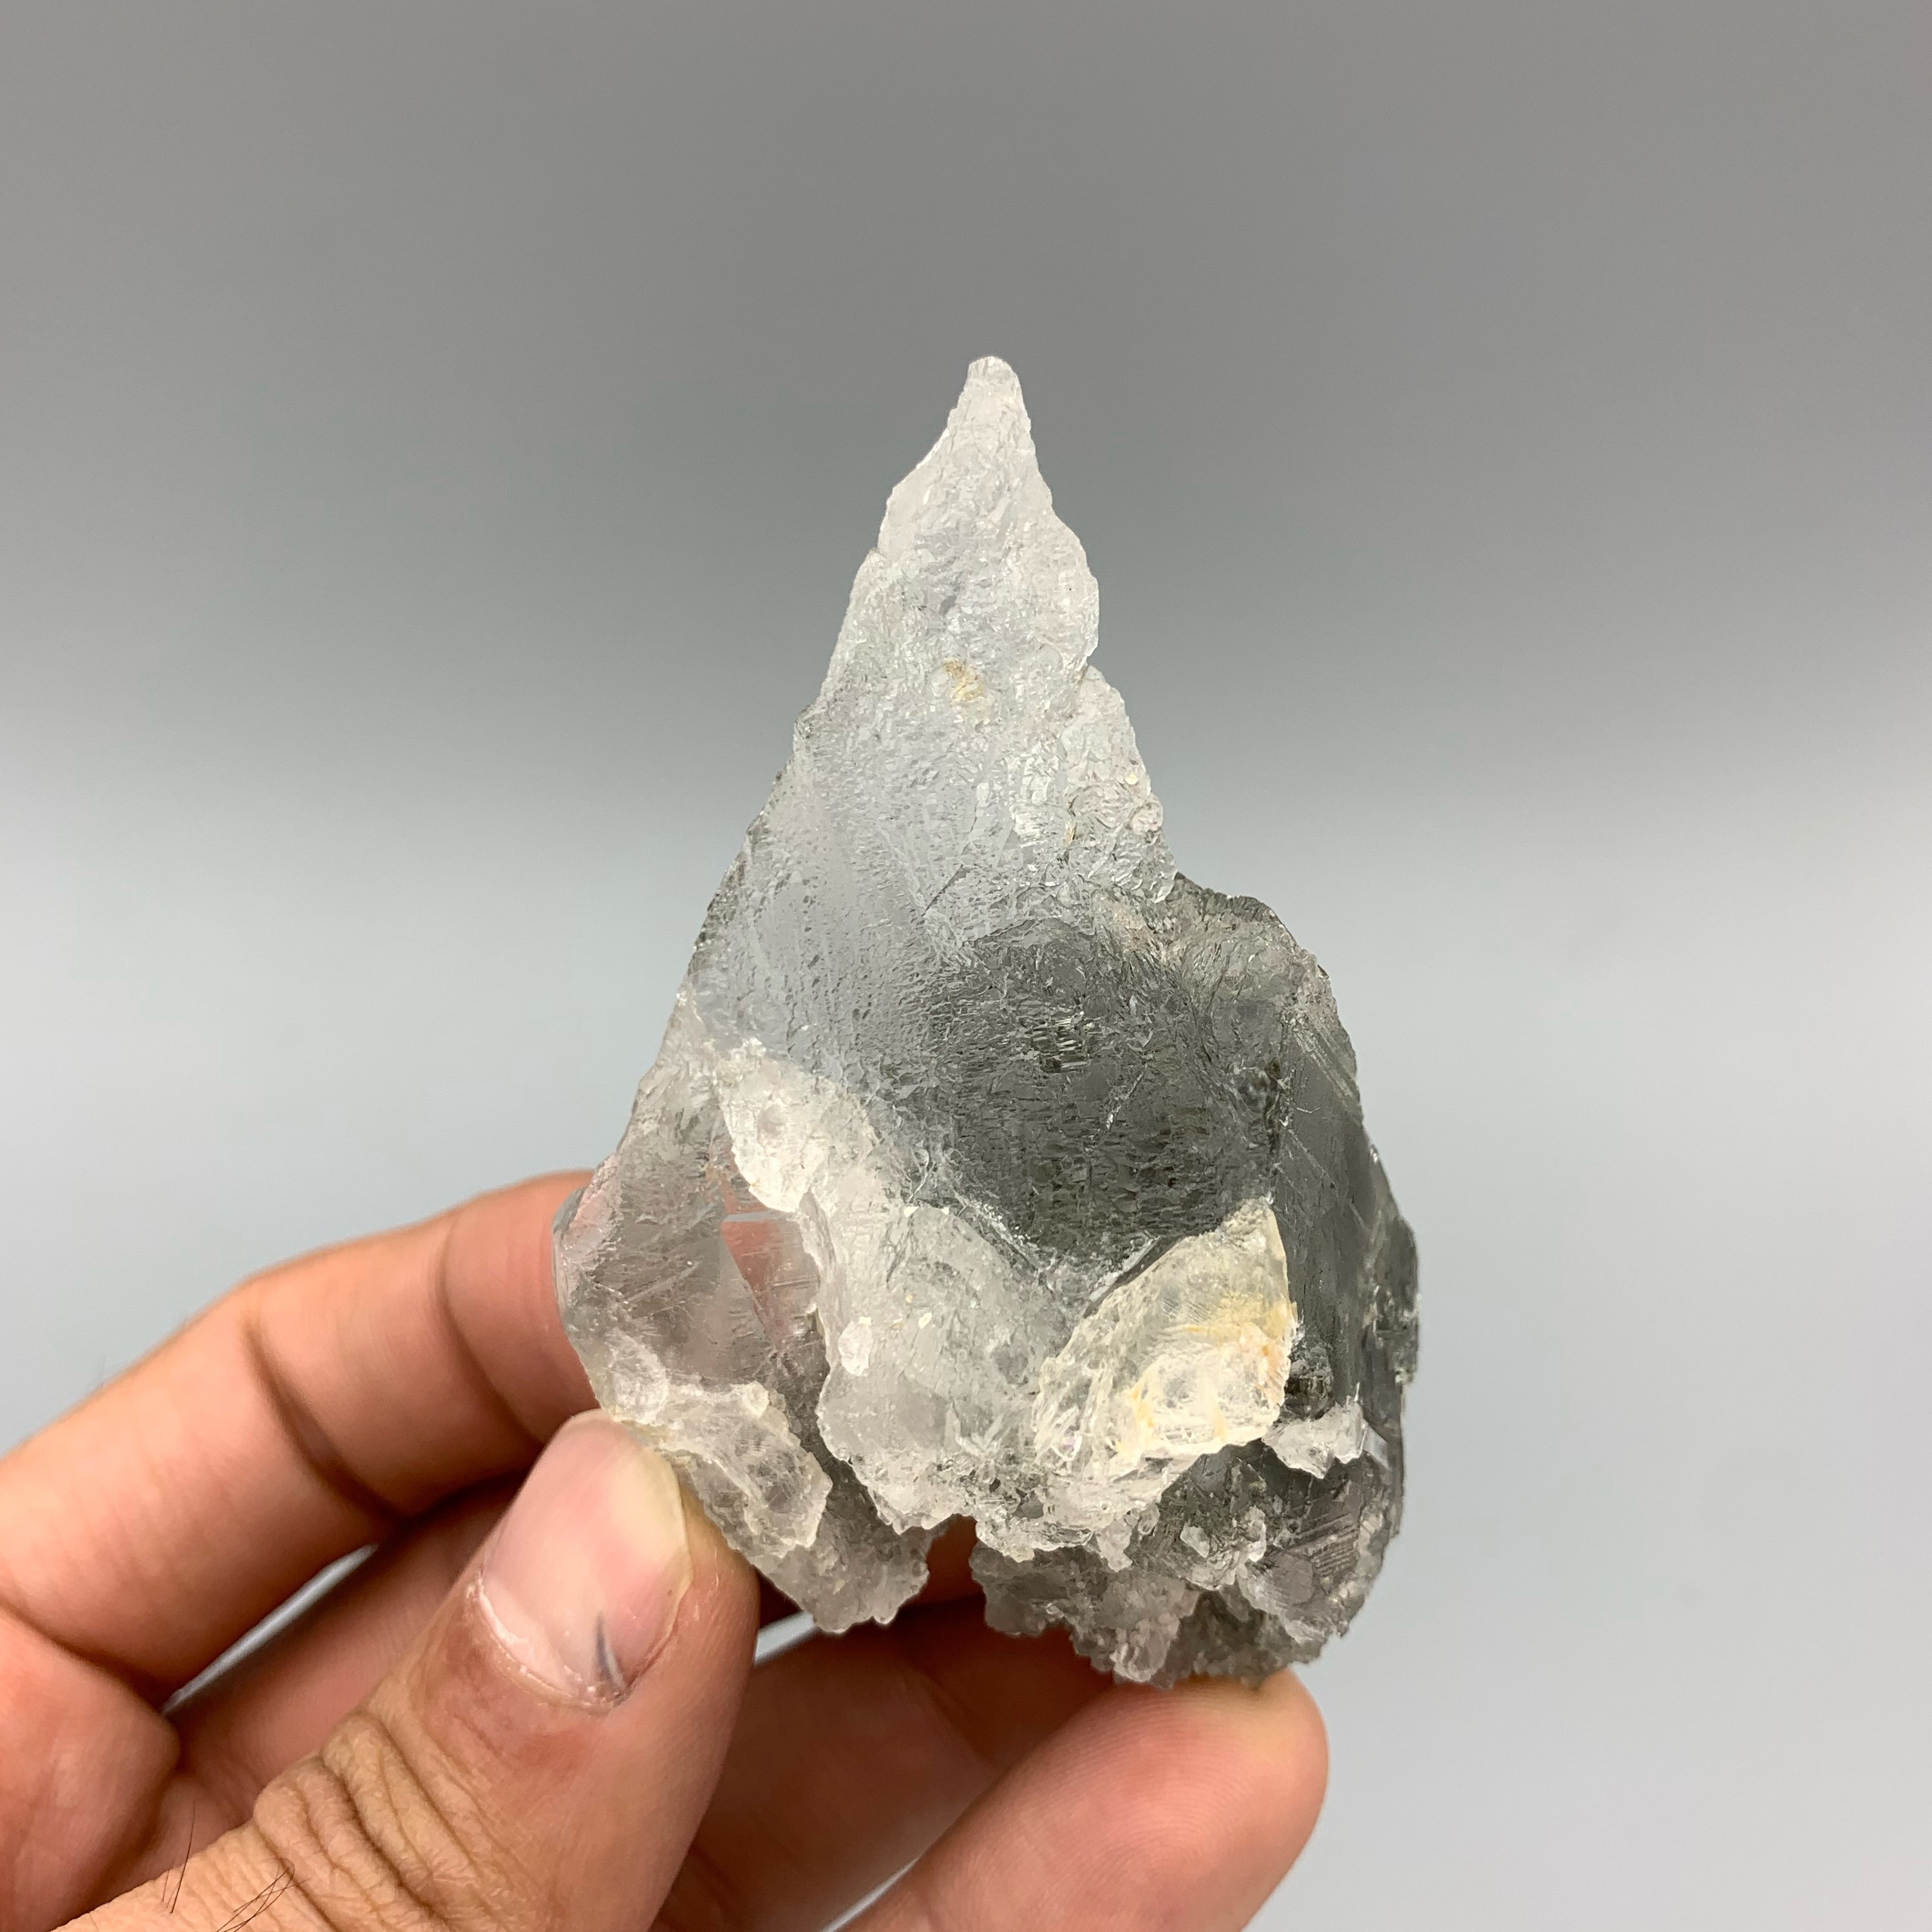 Naturally Etched Quartz With Detail Chlorite Inclusion